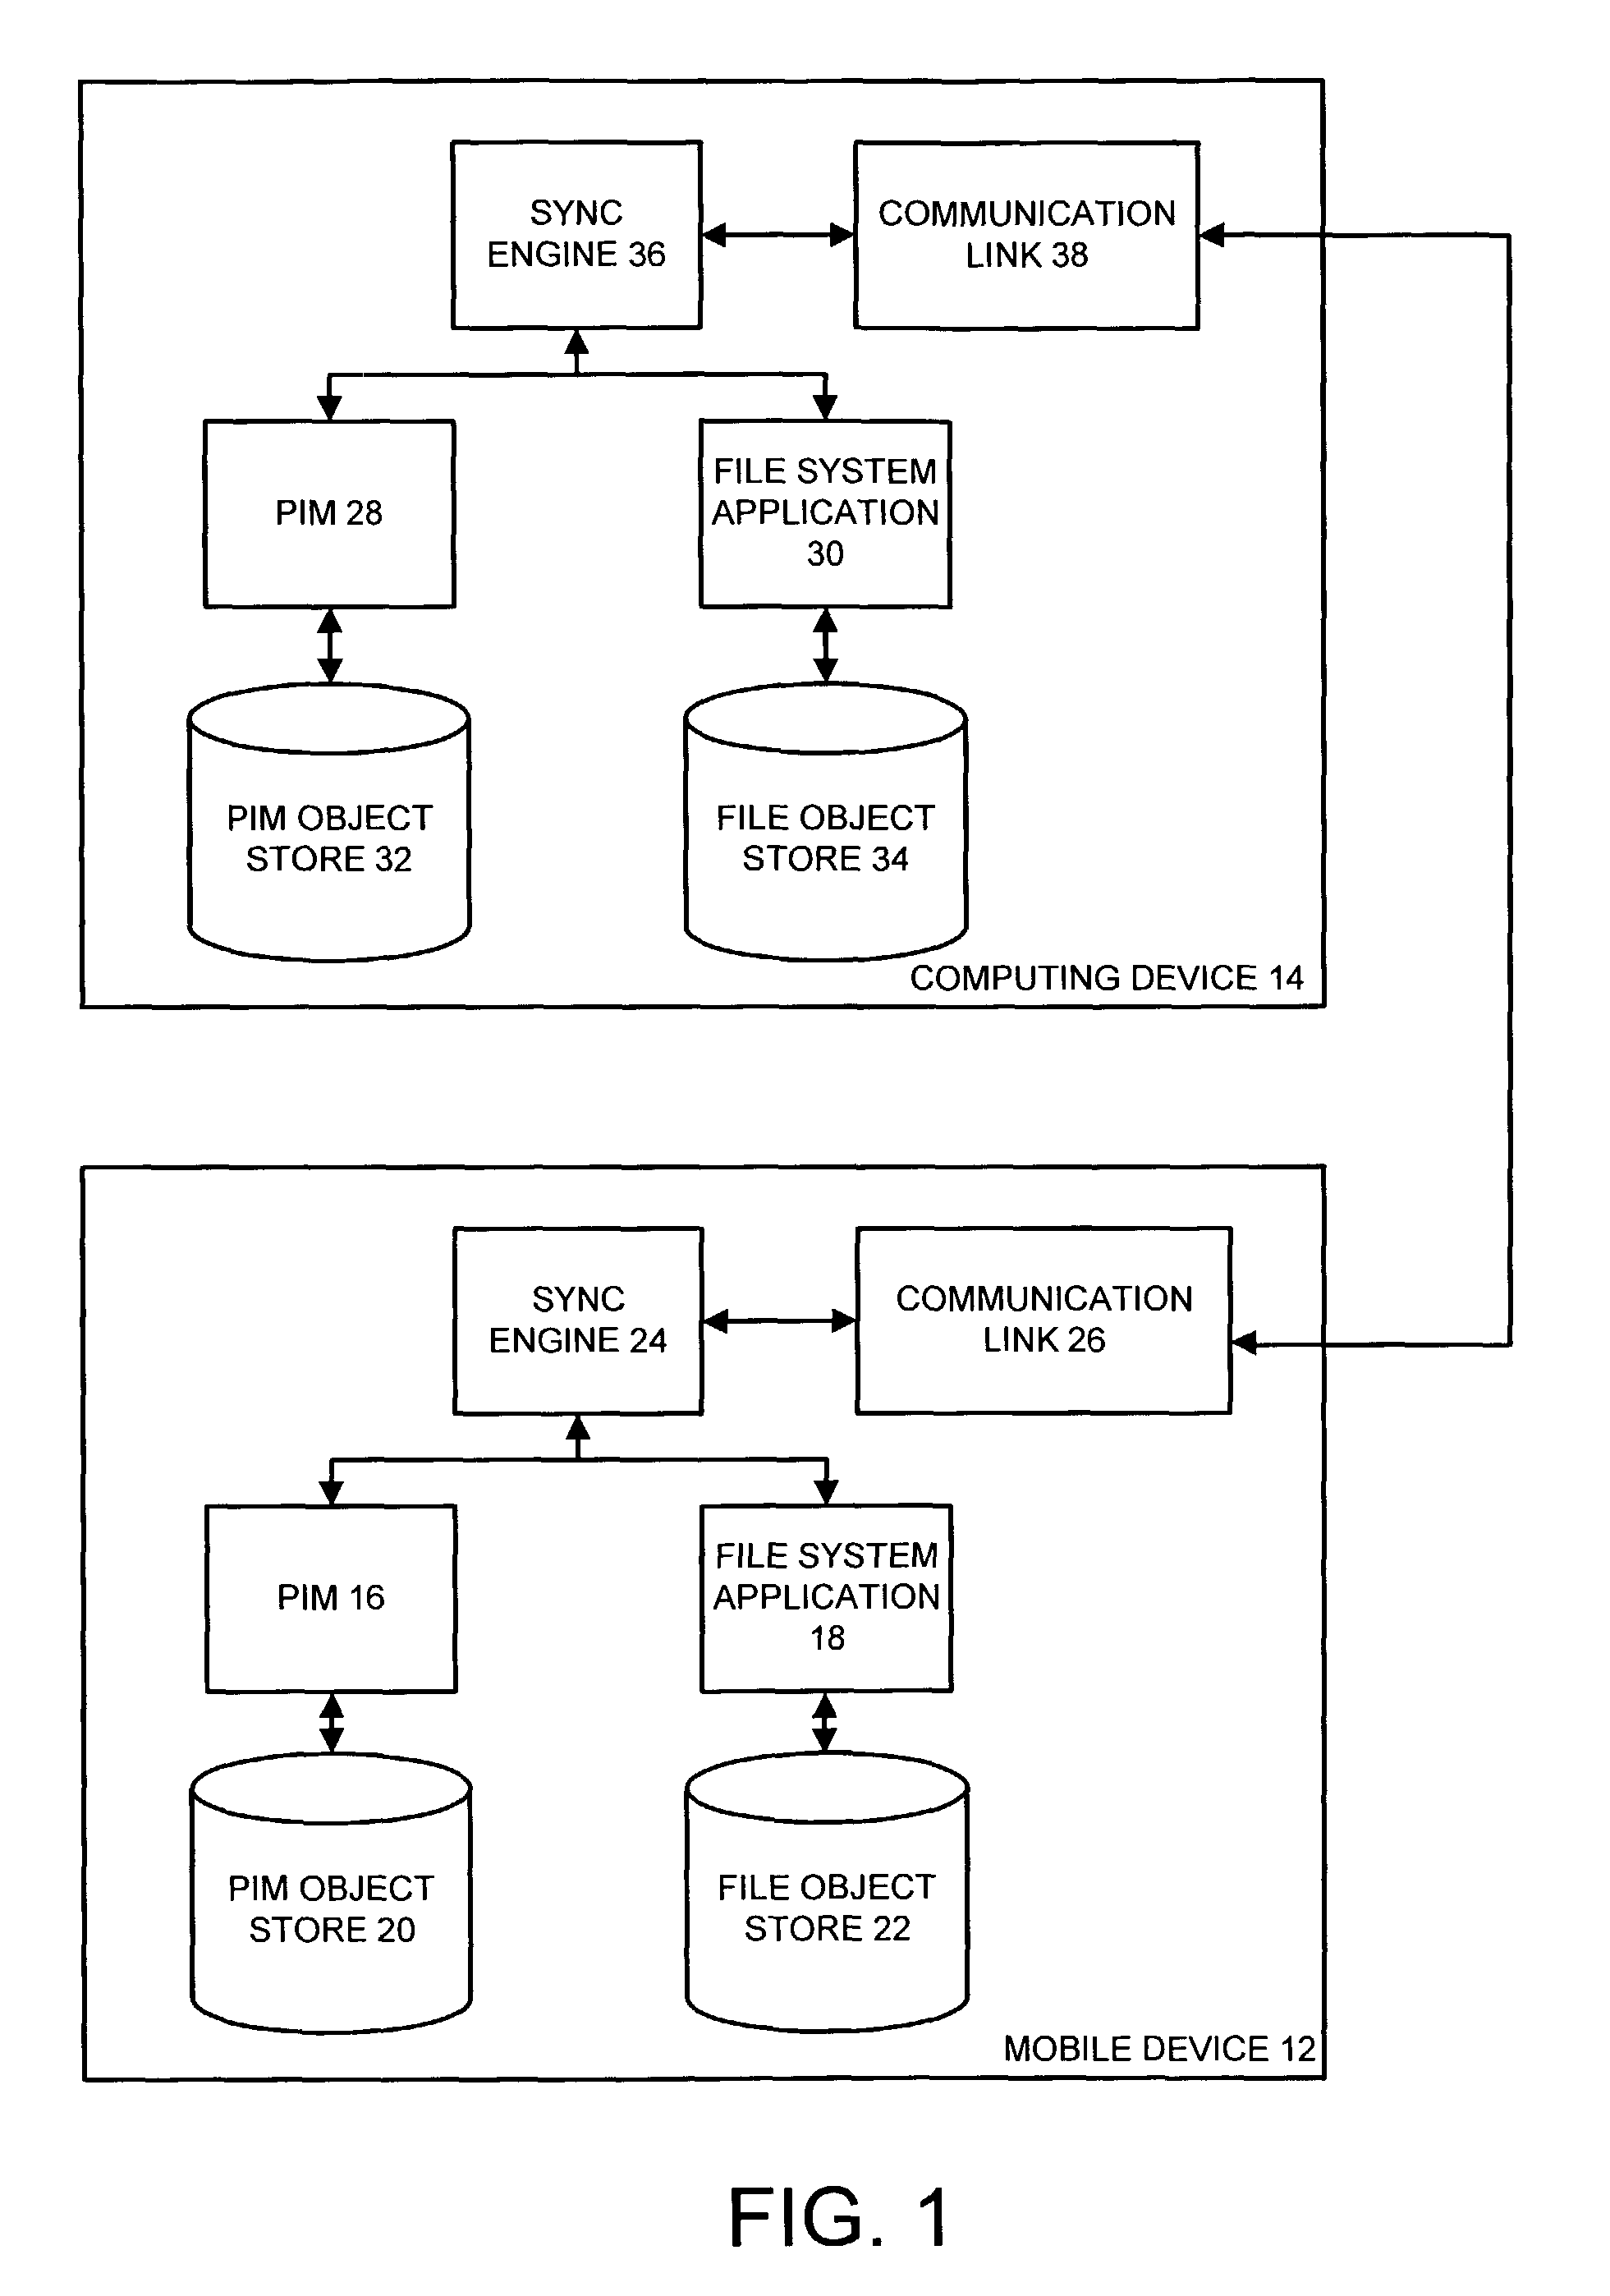 System and apparatus for sending complete responses to truncated electronic mail messages on a mobile device